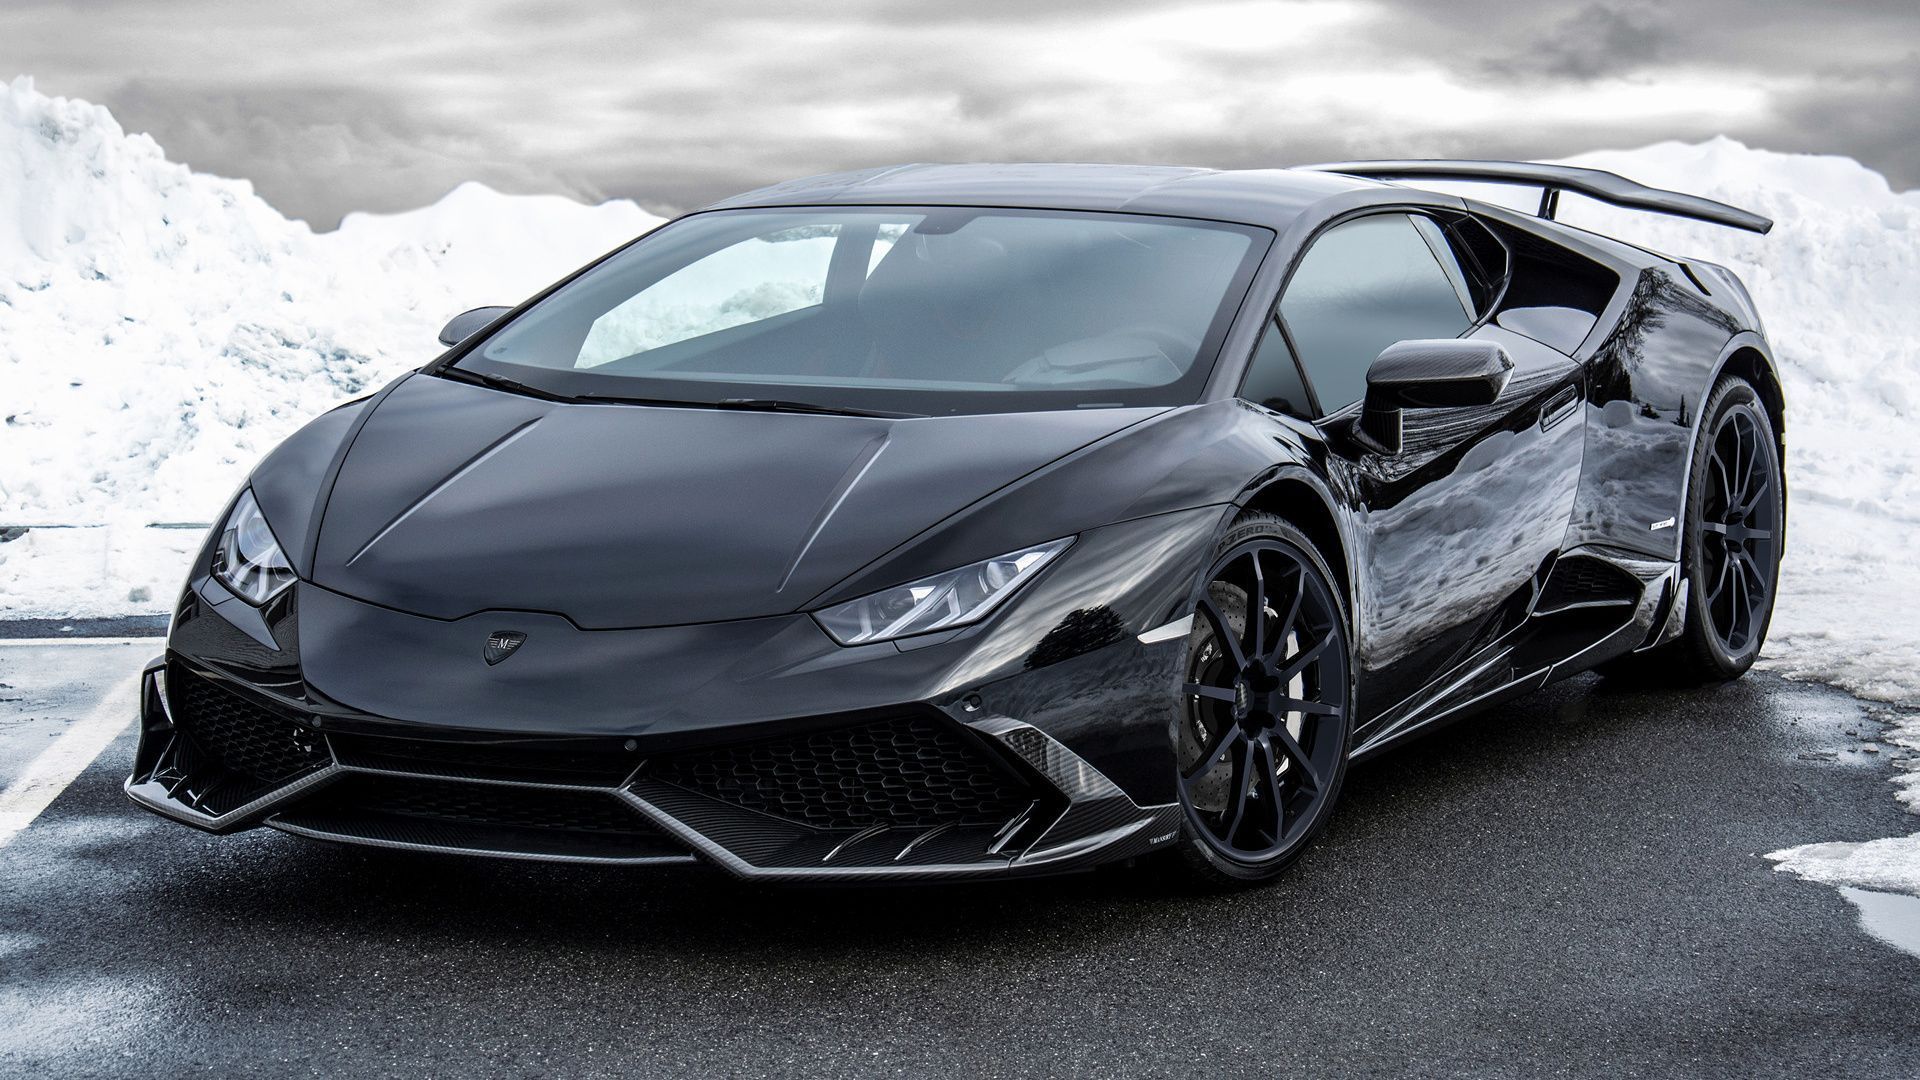 Lamborghini Huracan by Mansory (2015) Wallpapers and HD Images